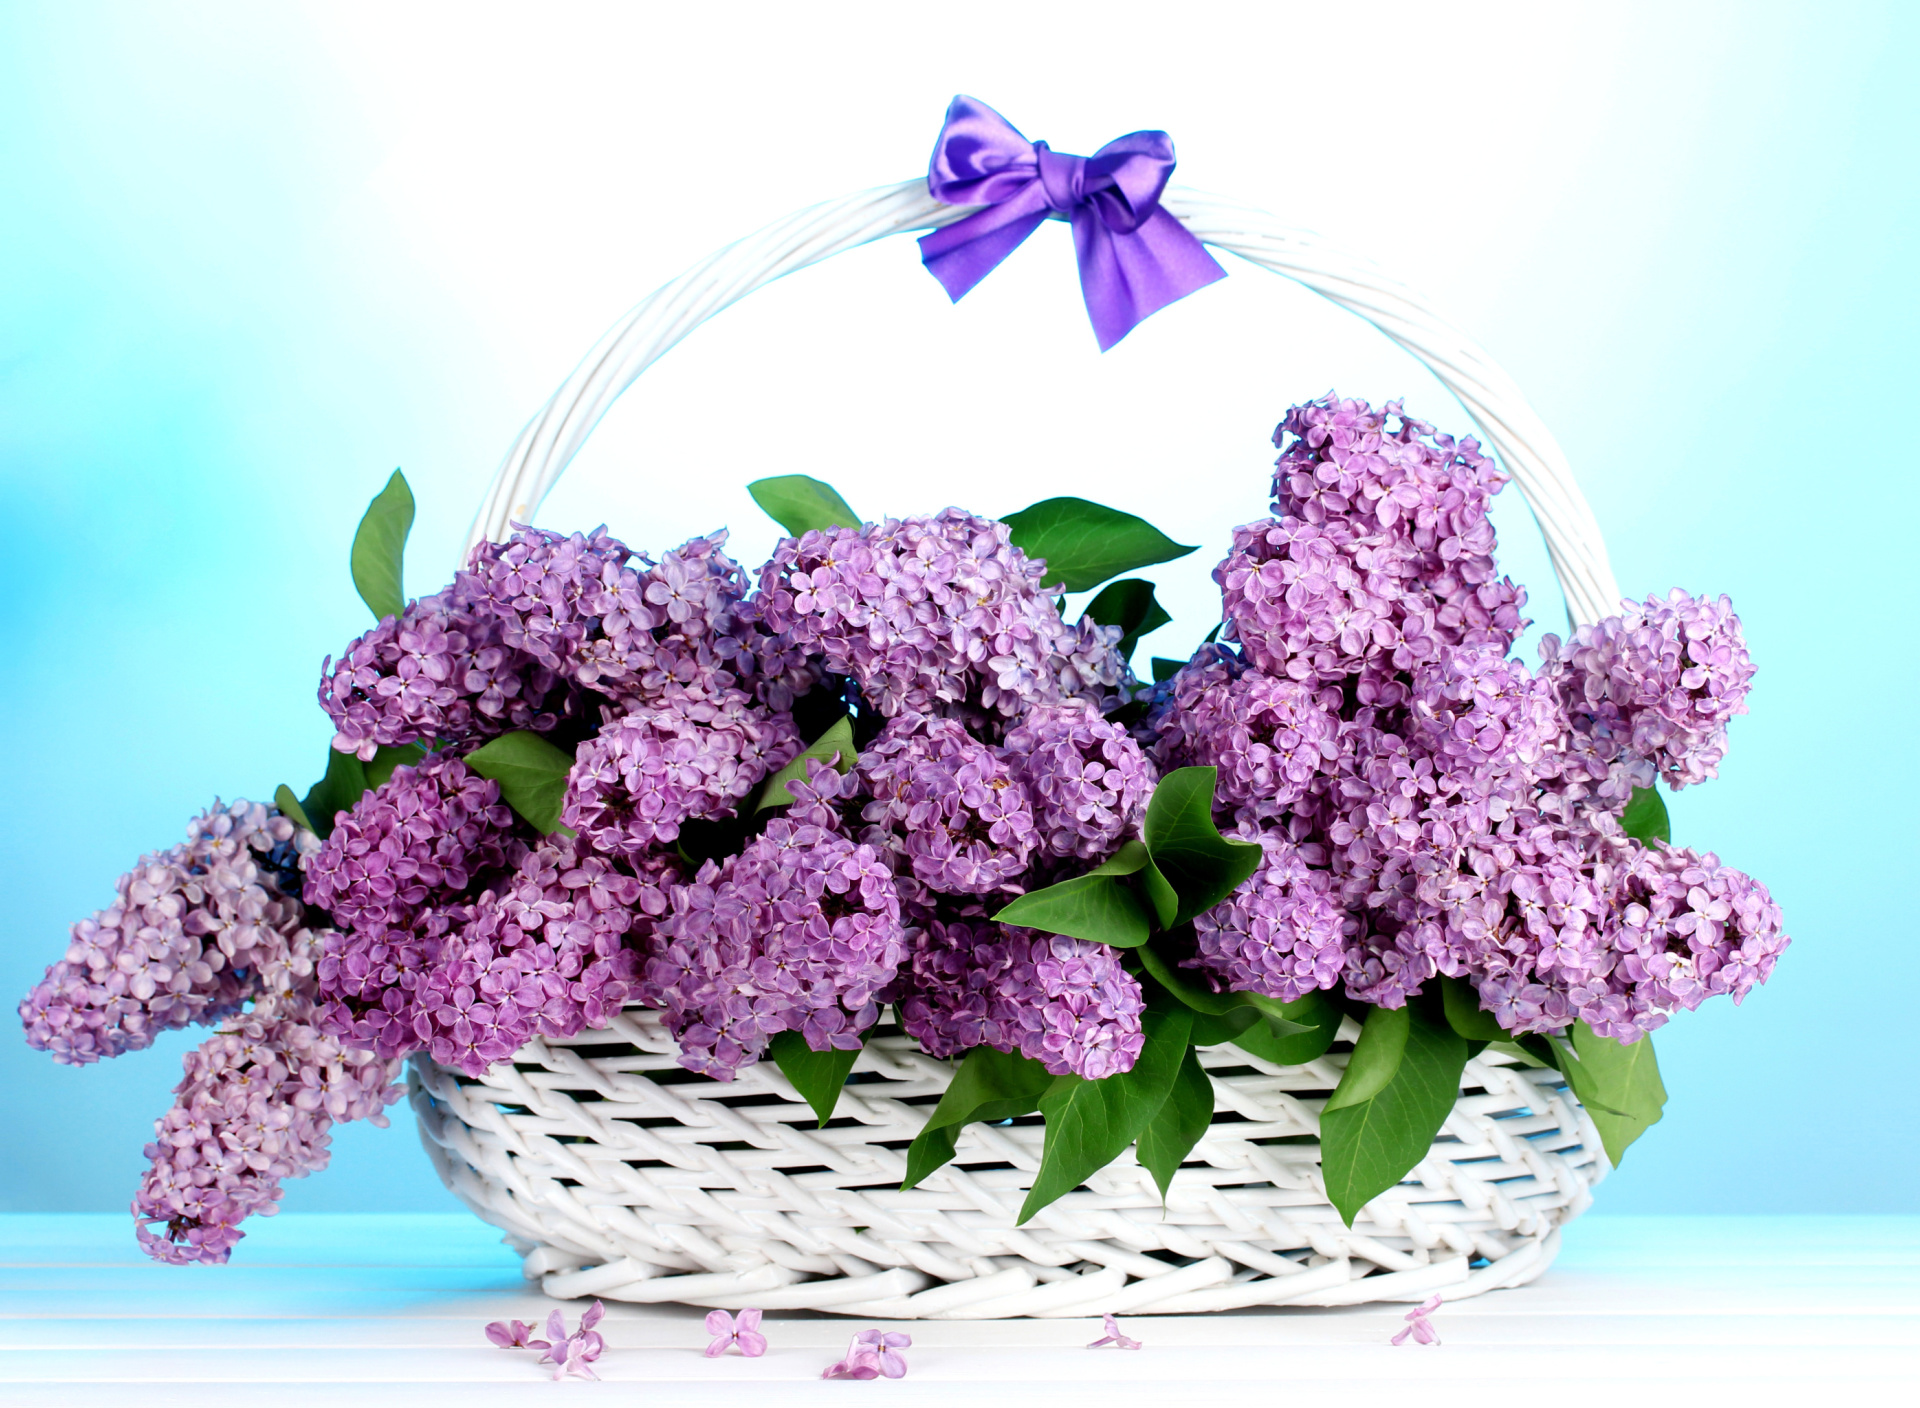 Baskets with lilac flowers screenshot #1 1920x1408